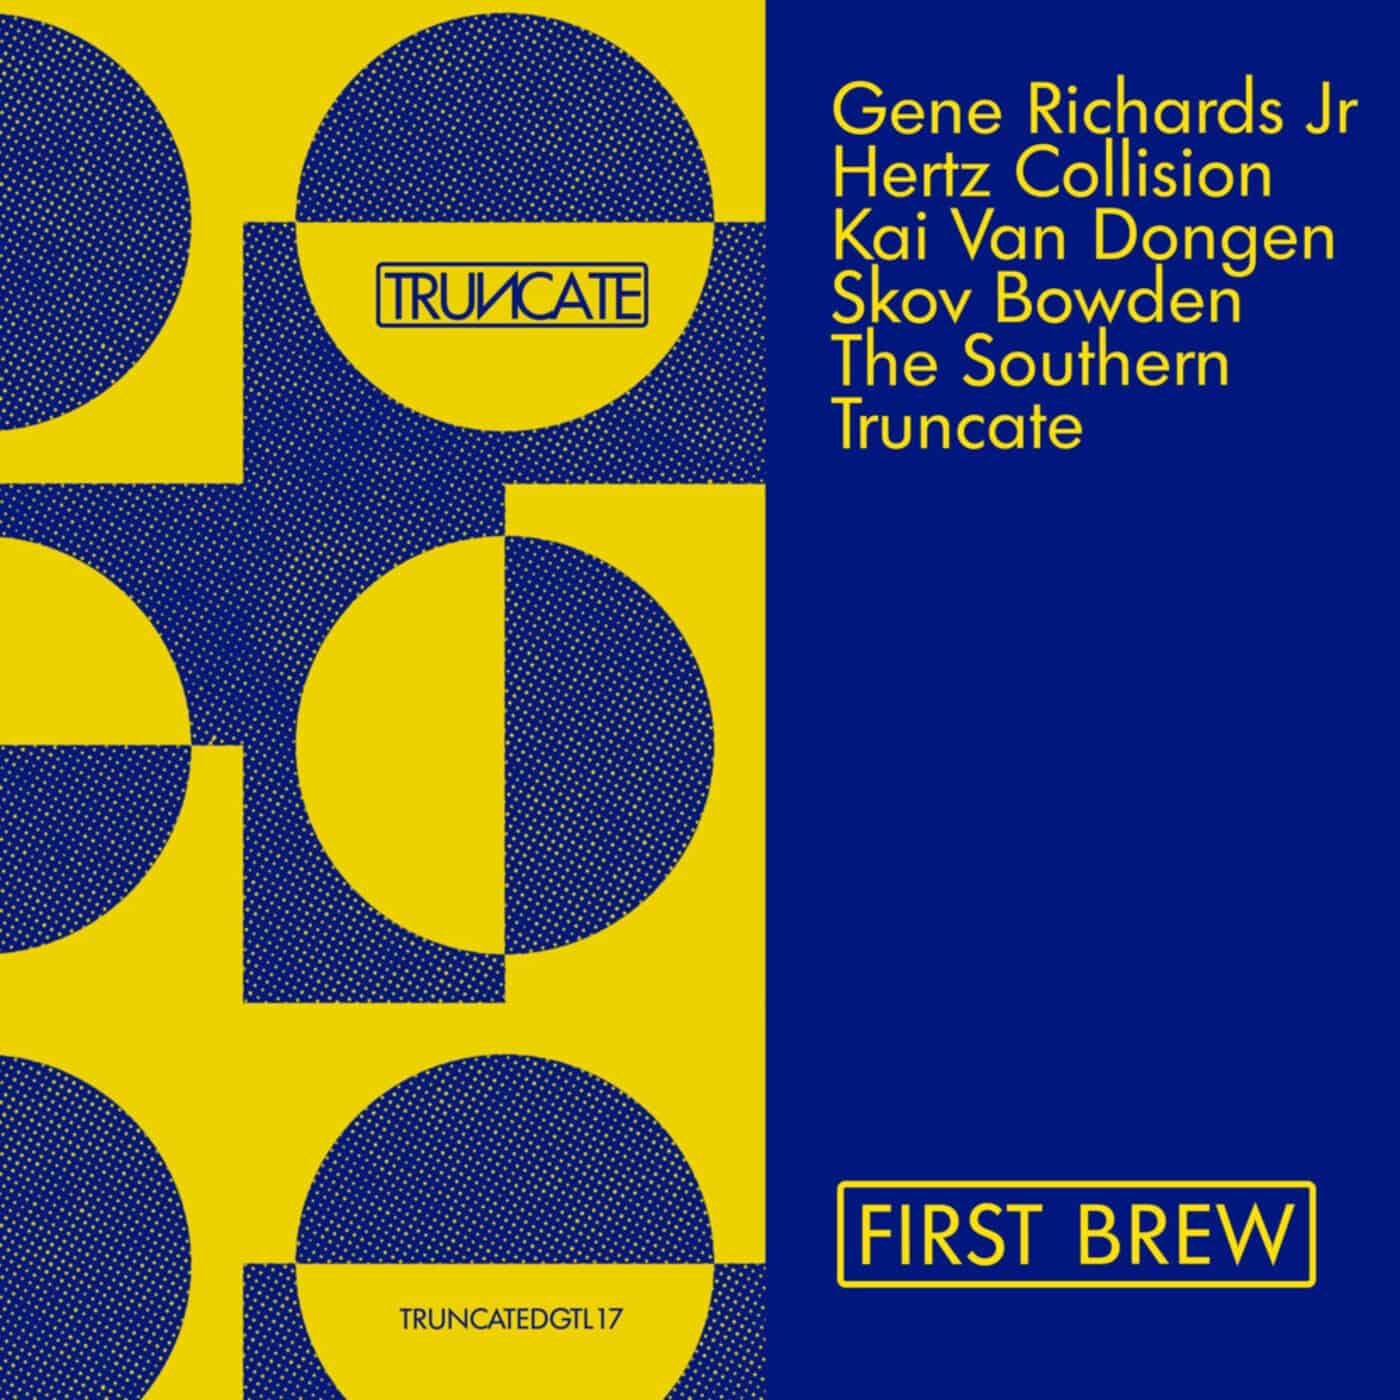 Download VA - First Brew on Electrobuzz